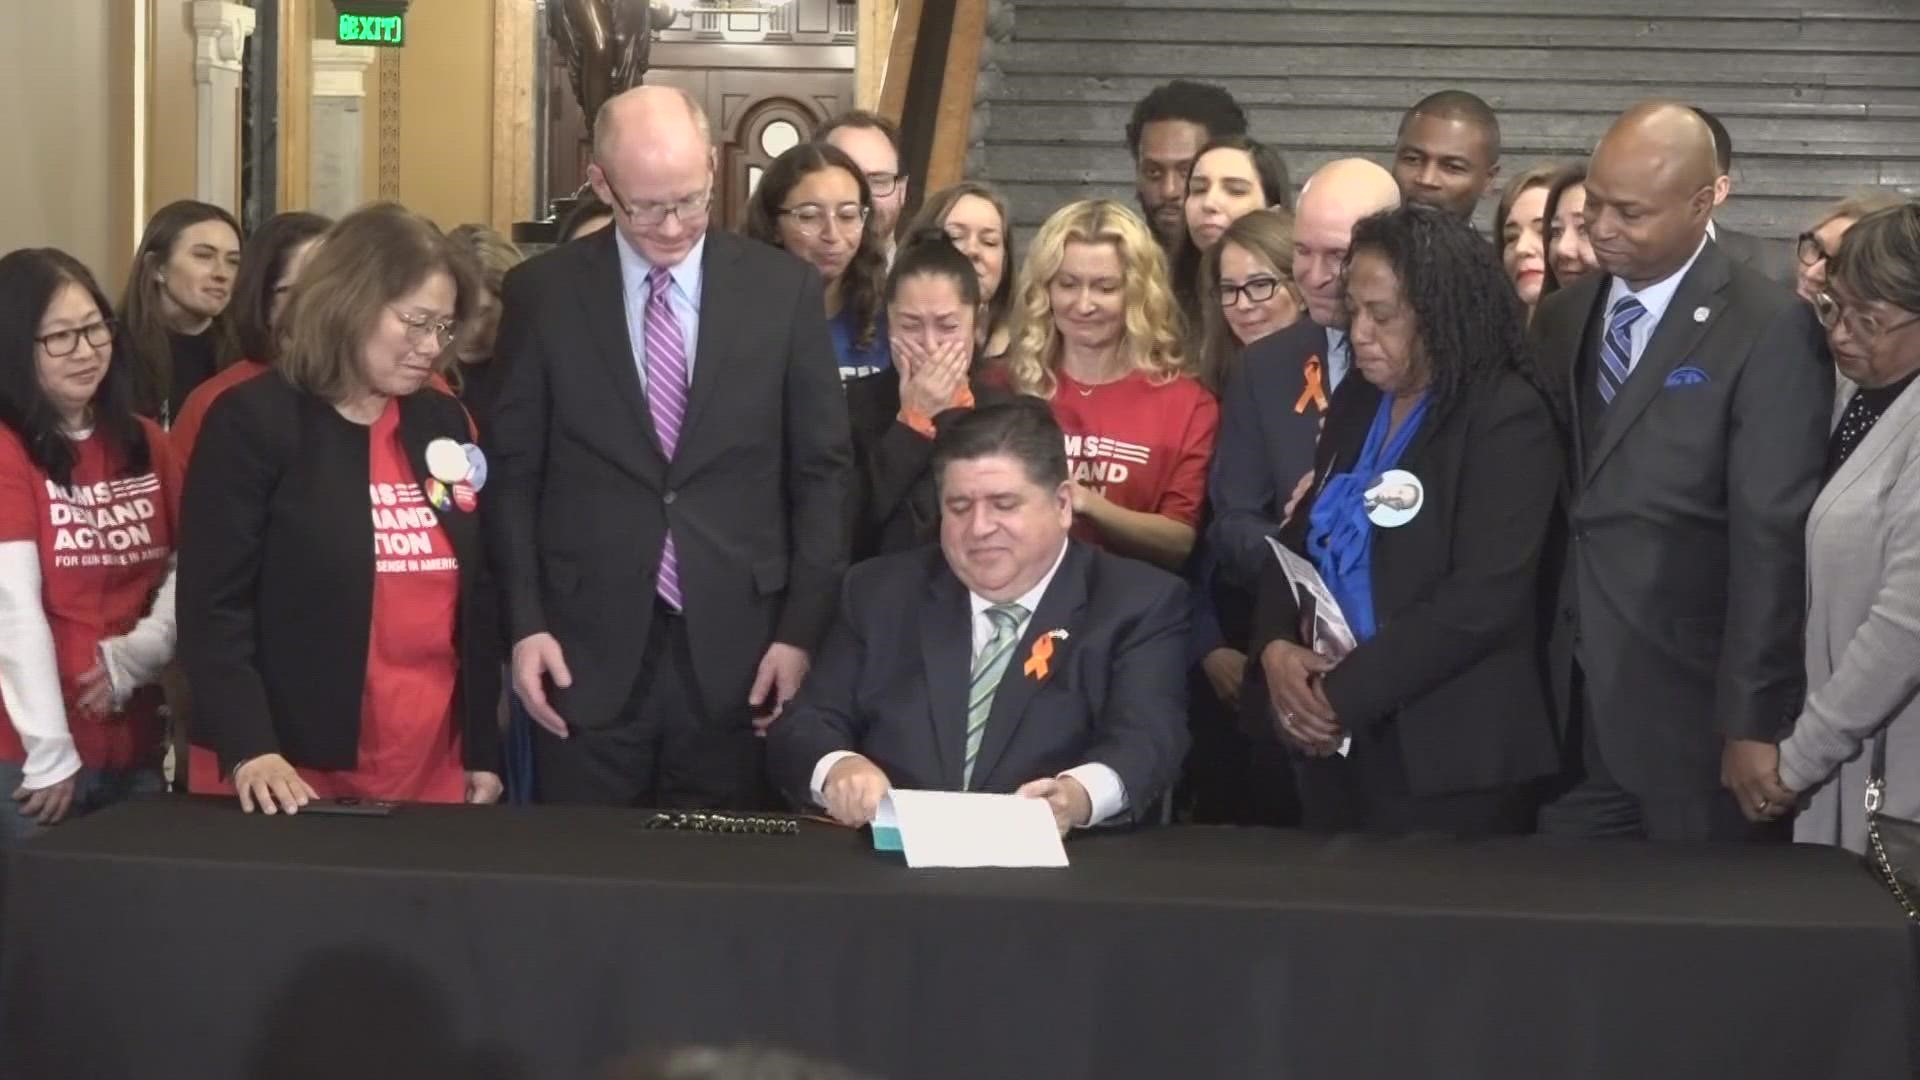 Pritzker signed the bill while flanked by Illinois congressional Democrats and gun control advocates from around the state.